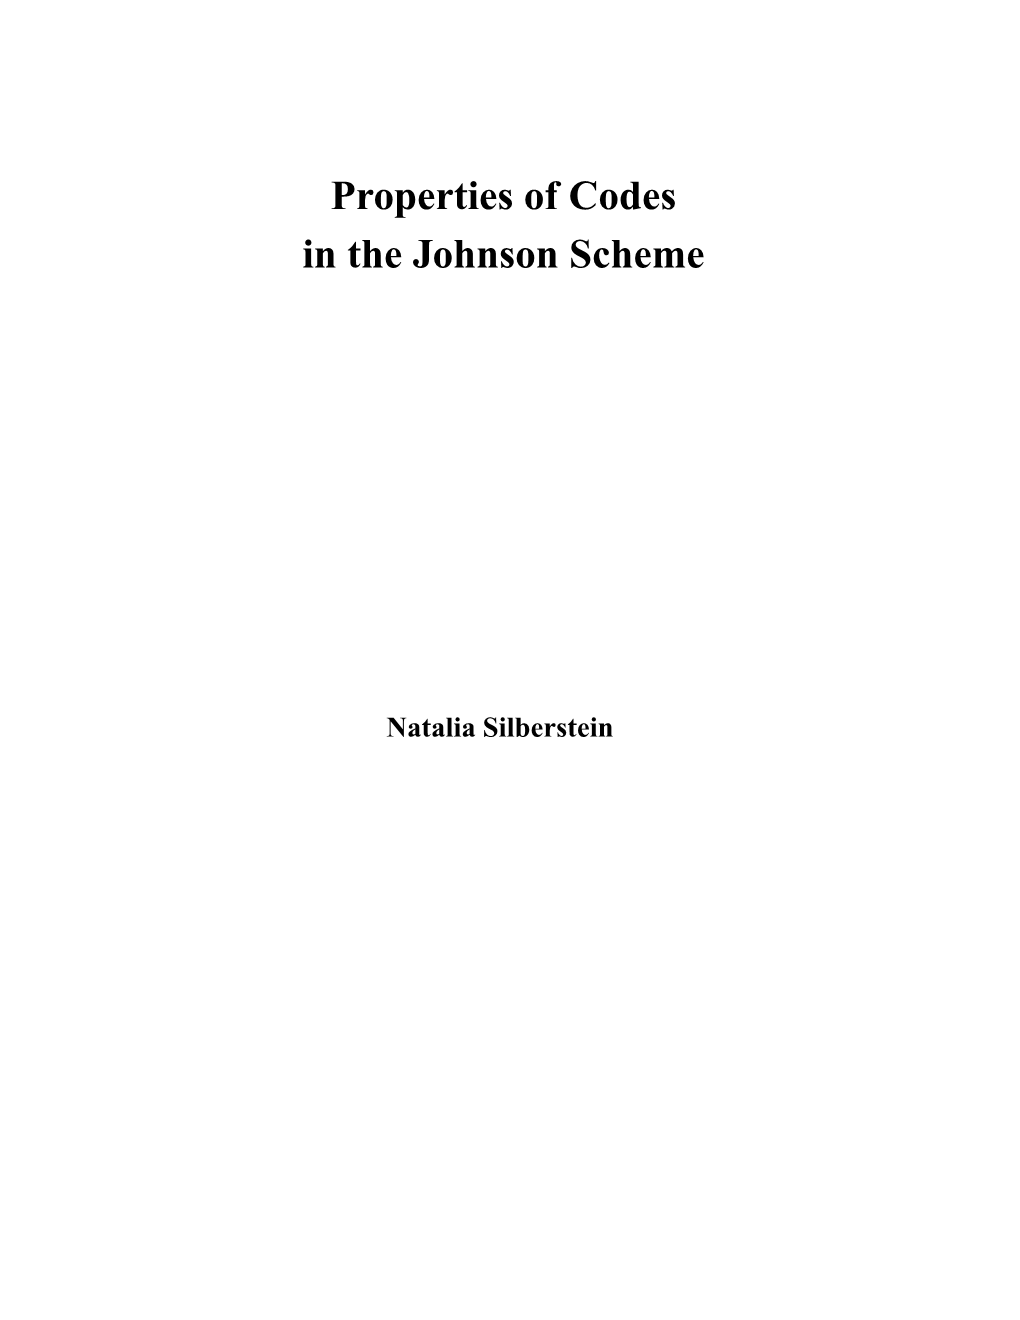 Properties of Codes in the Johnson Scheme